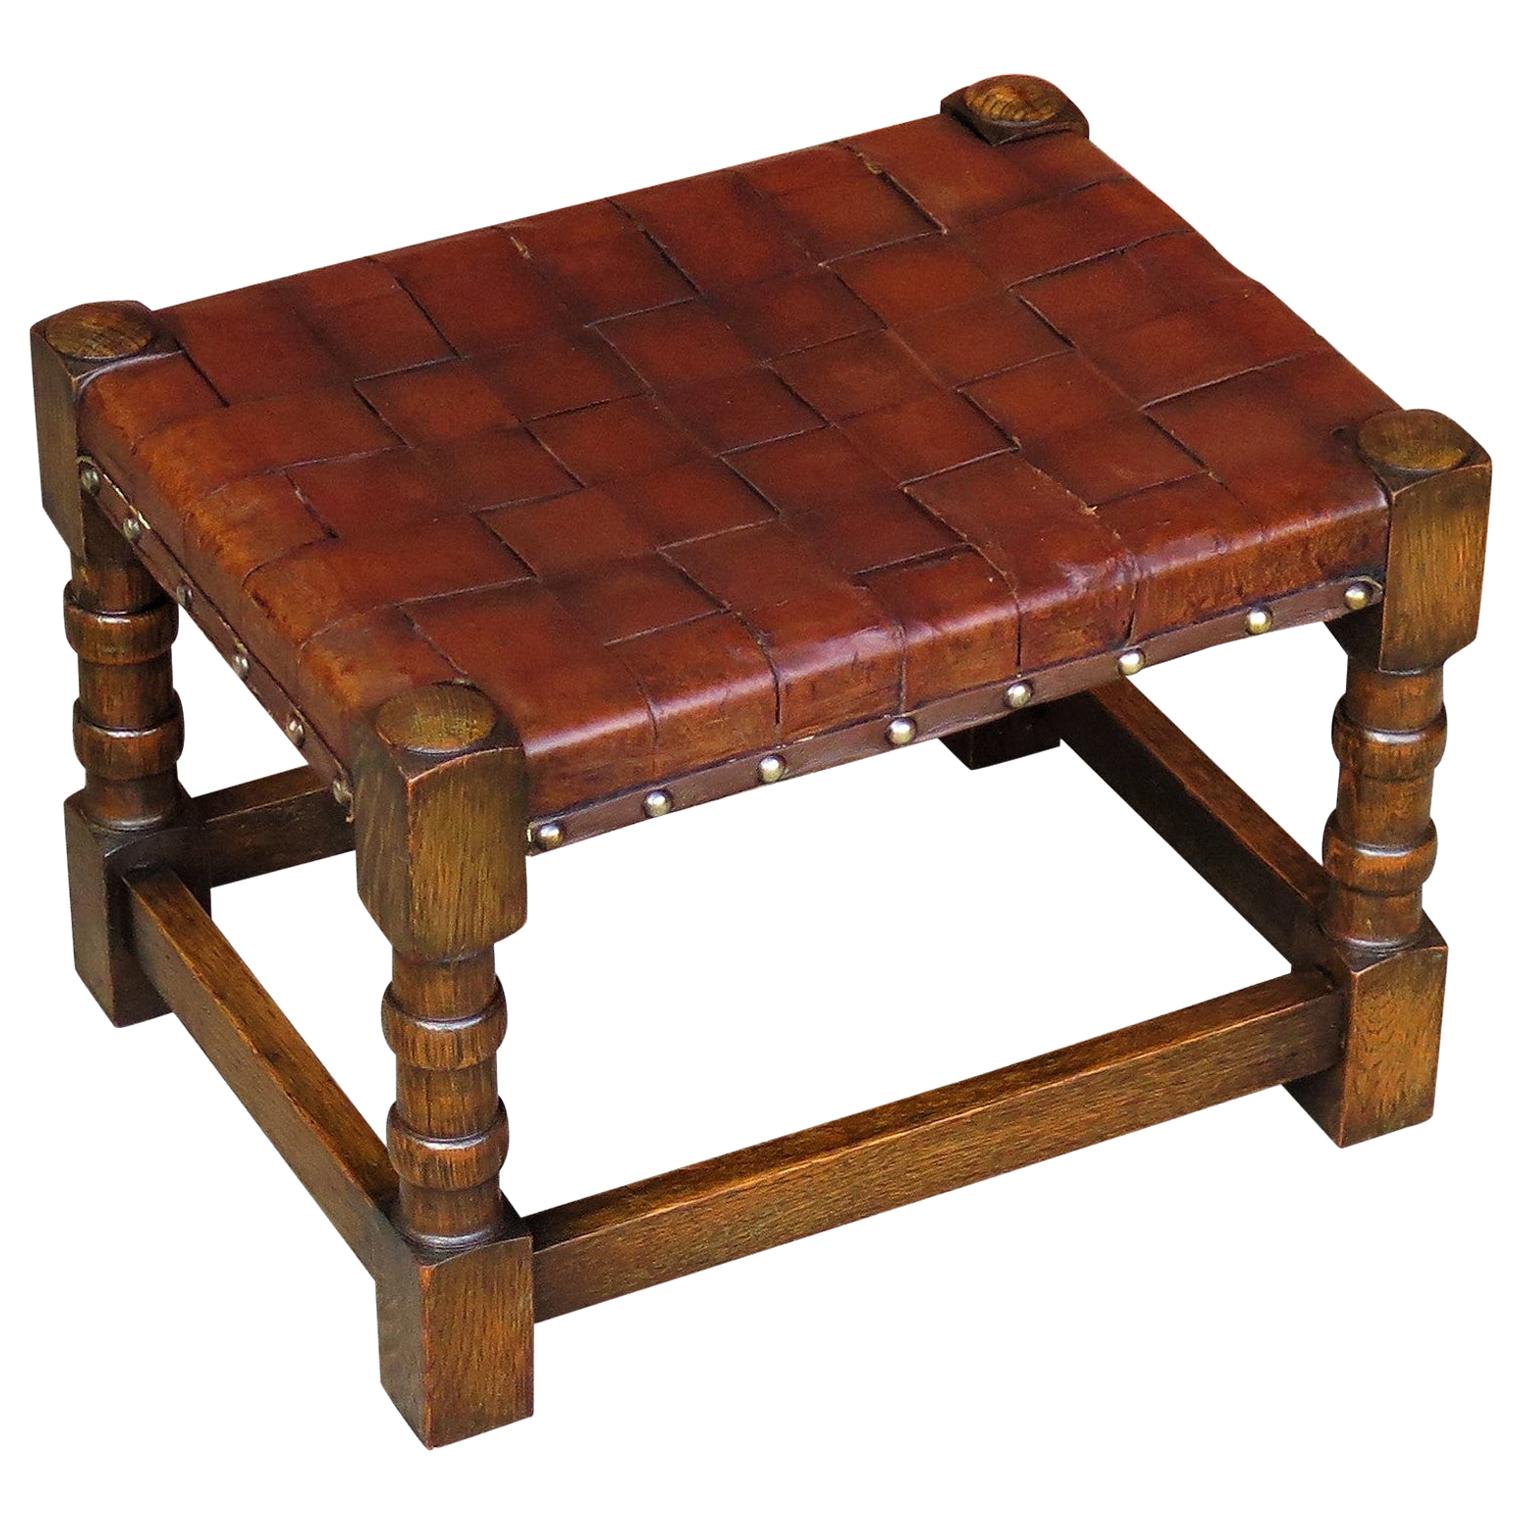 Handmade Oak Stool with Leather Strap Top, Arts & Crafts Late 19th Century For Sale